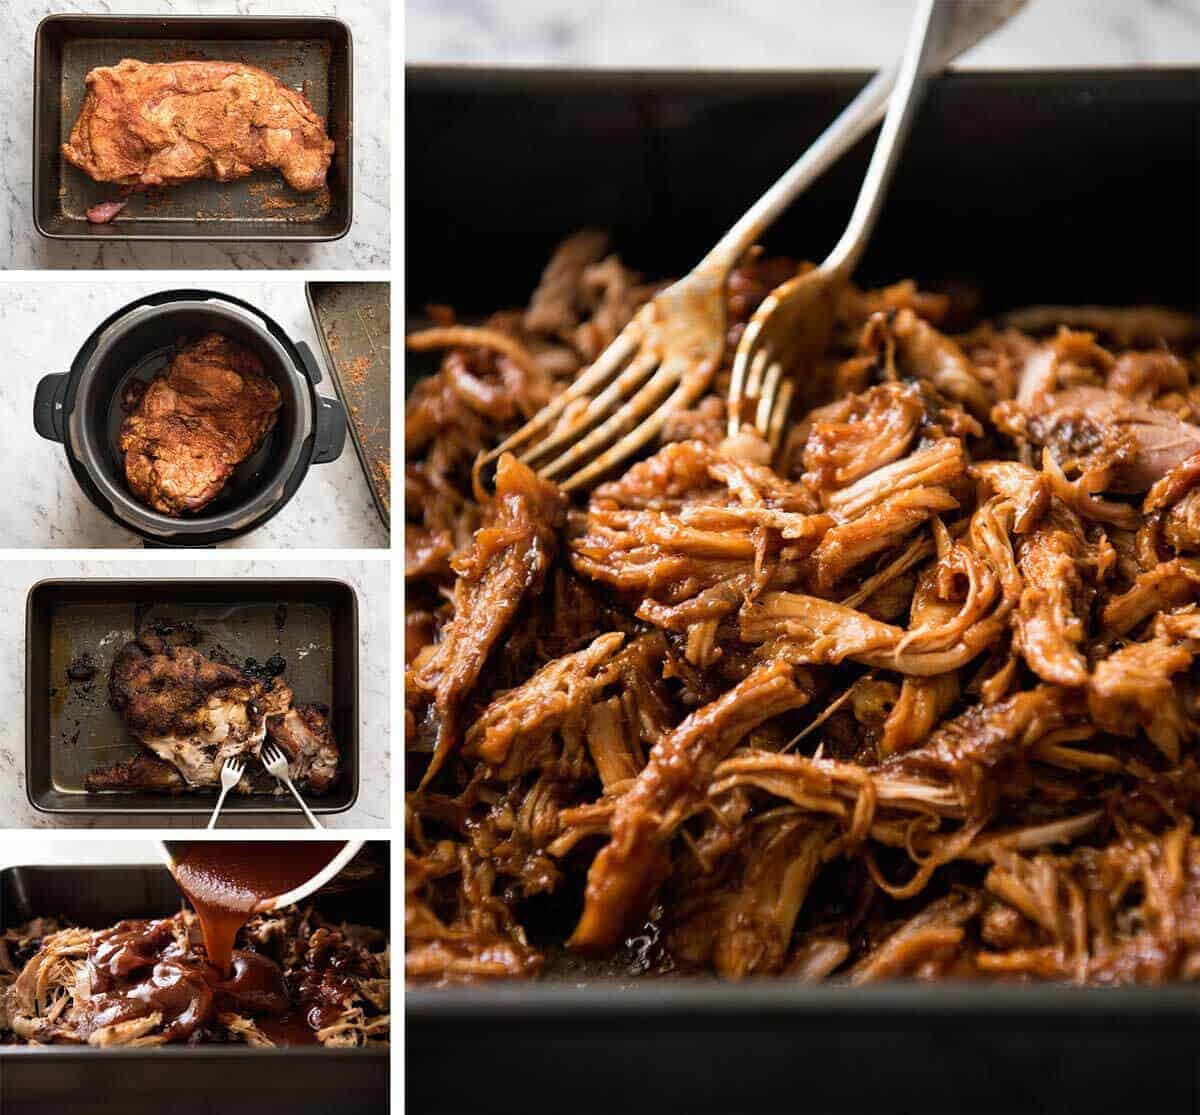 Slow Cooker Bbq Pulled Pork Sandwich Recipetin Eats,What Is A Pergola Good For